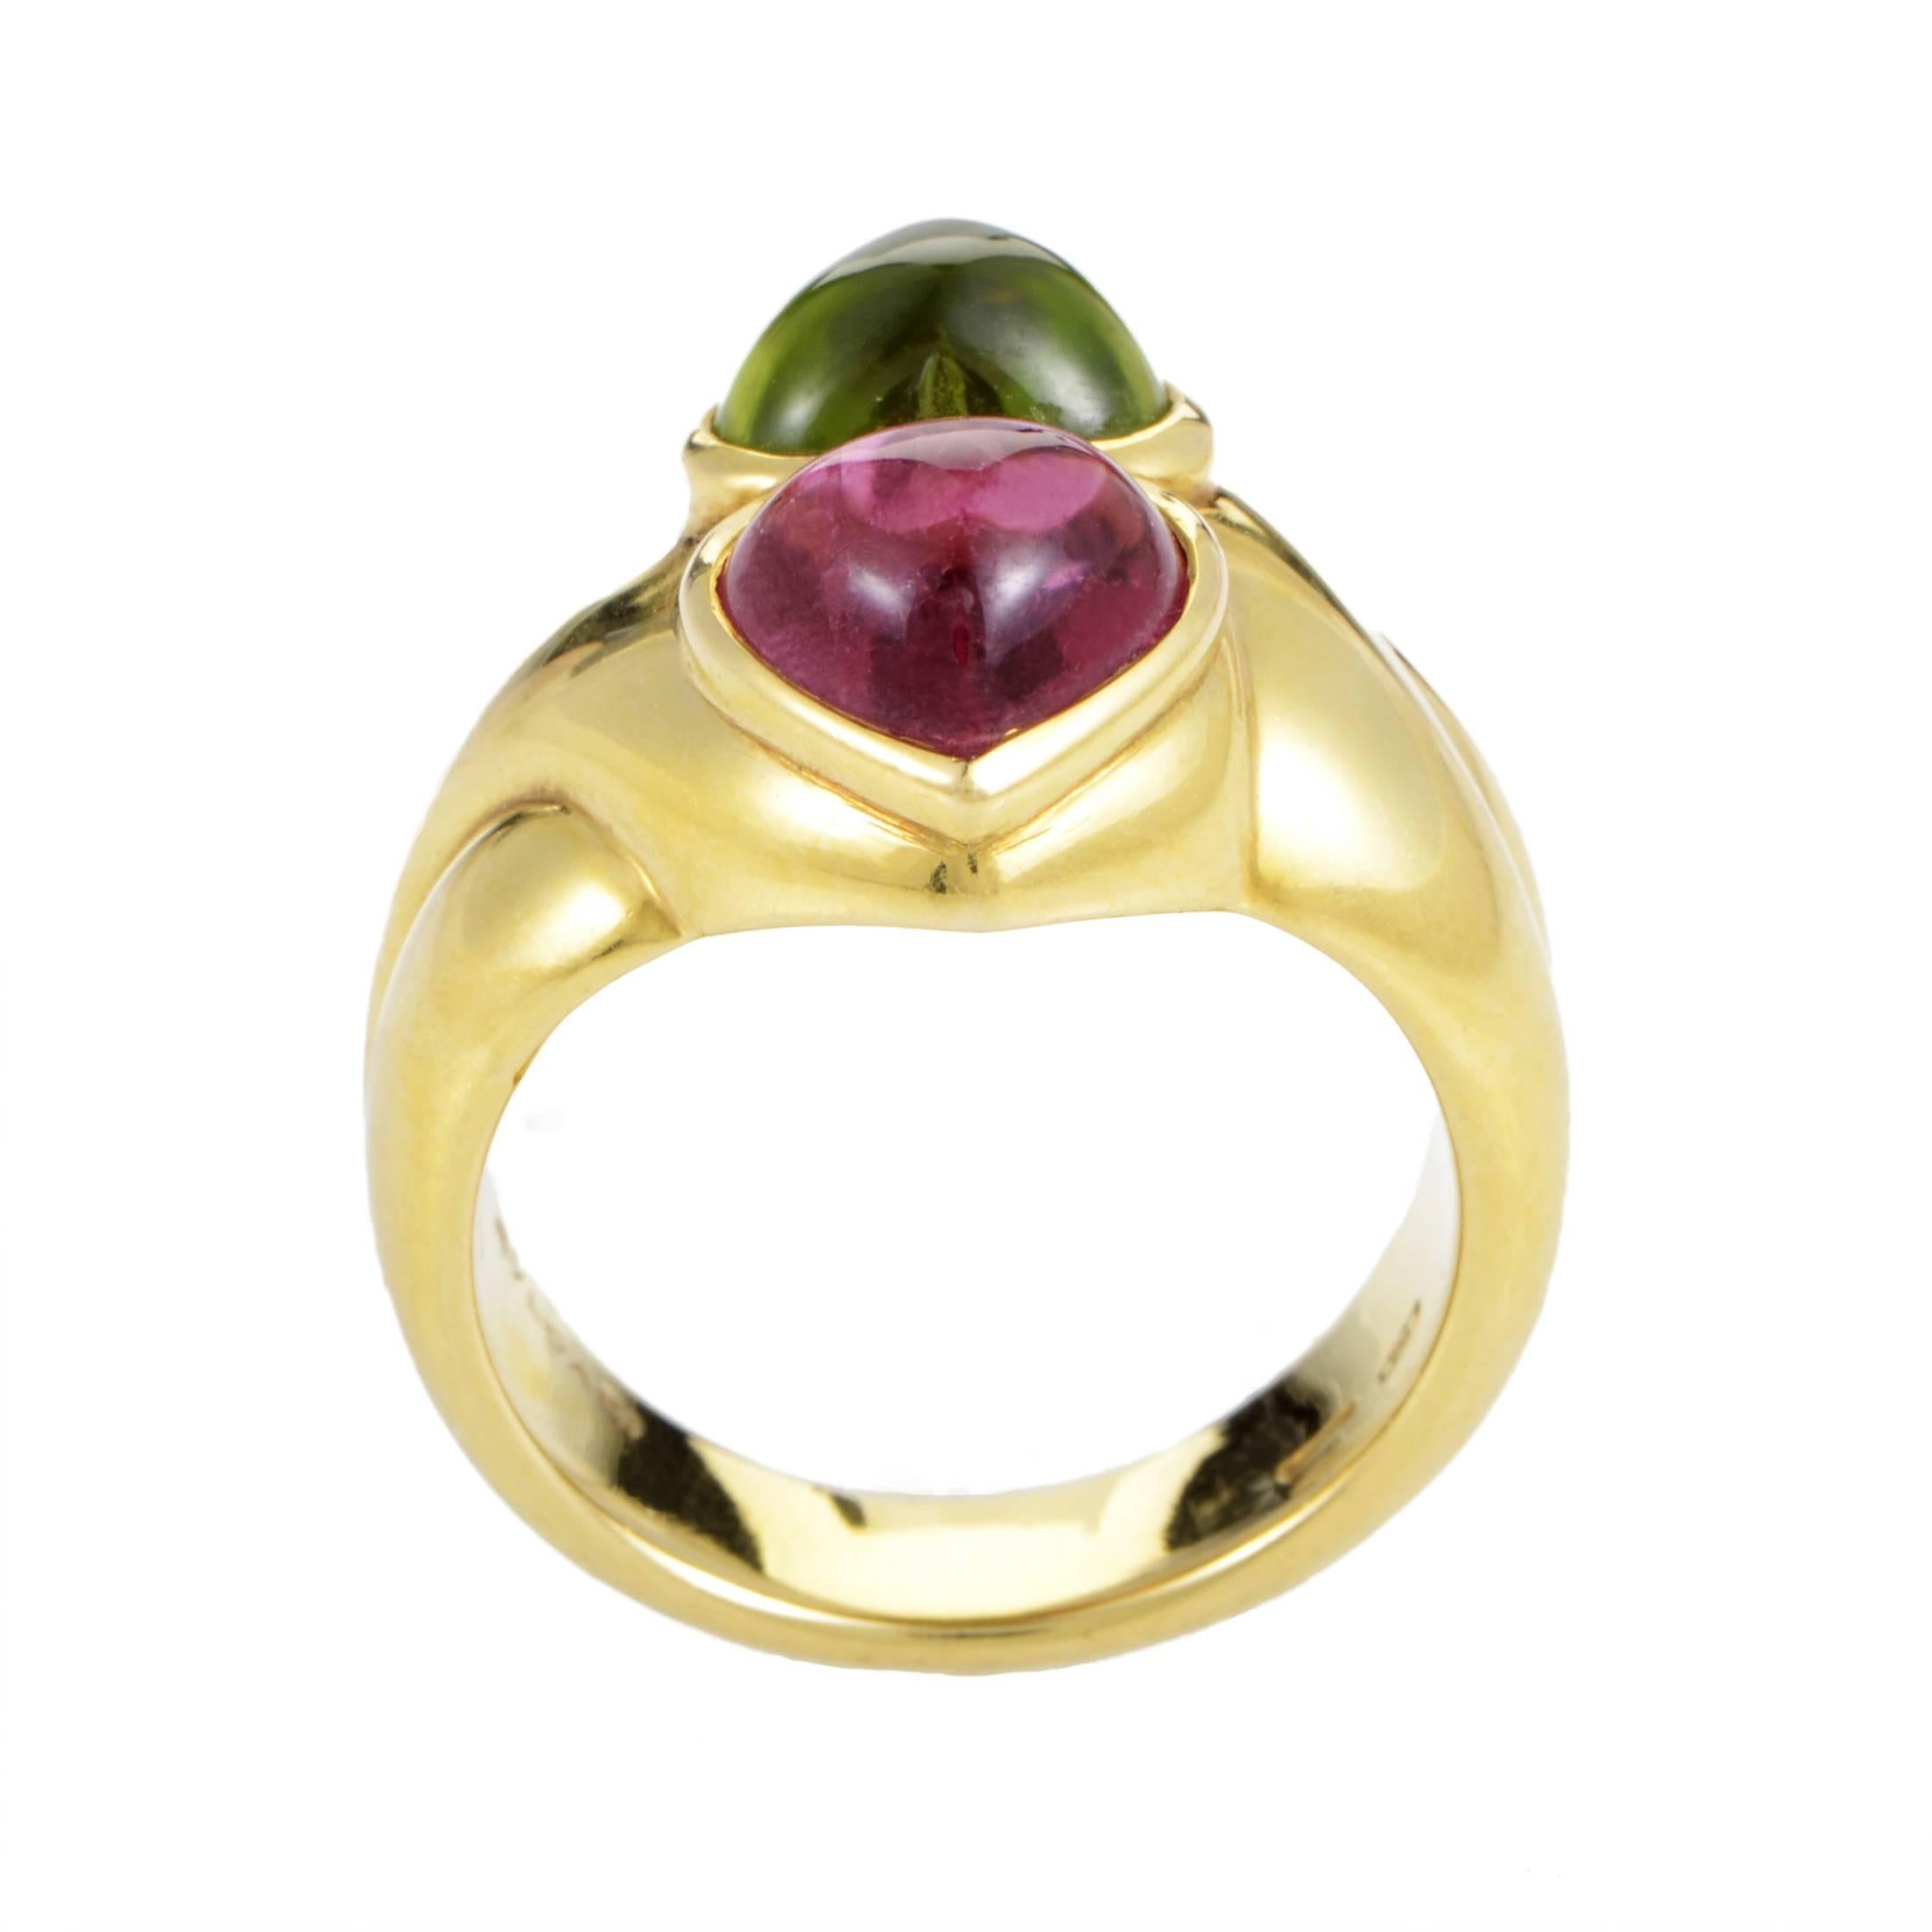 Tastefully combining the charming vivacious colors of adorable pink tourmaline and splendid peridot stone against the fabulously radiant tone of 18K yellow gold, this gorgeous ring from Bvlgari offers a stunning look in the brand's distinctive